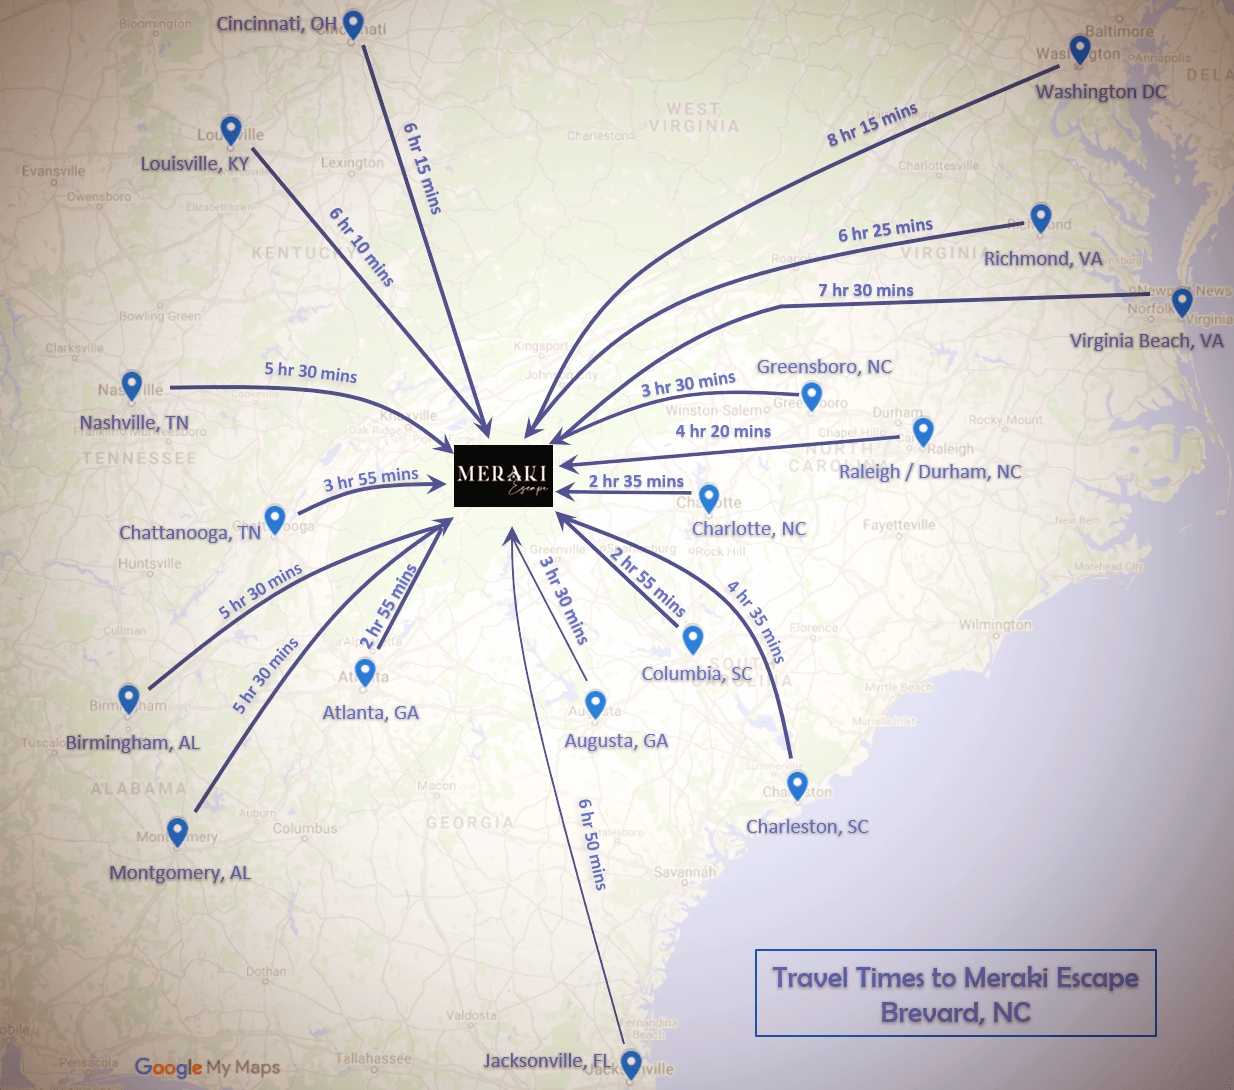 a map showing the travel times to marble escape in nc